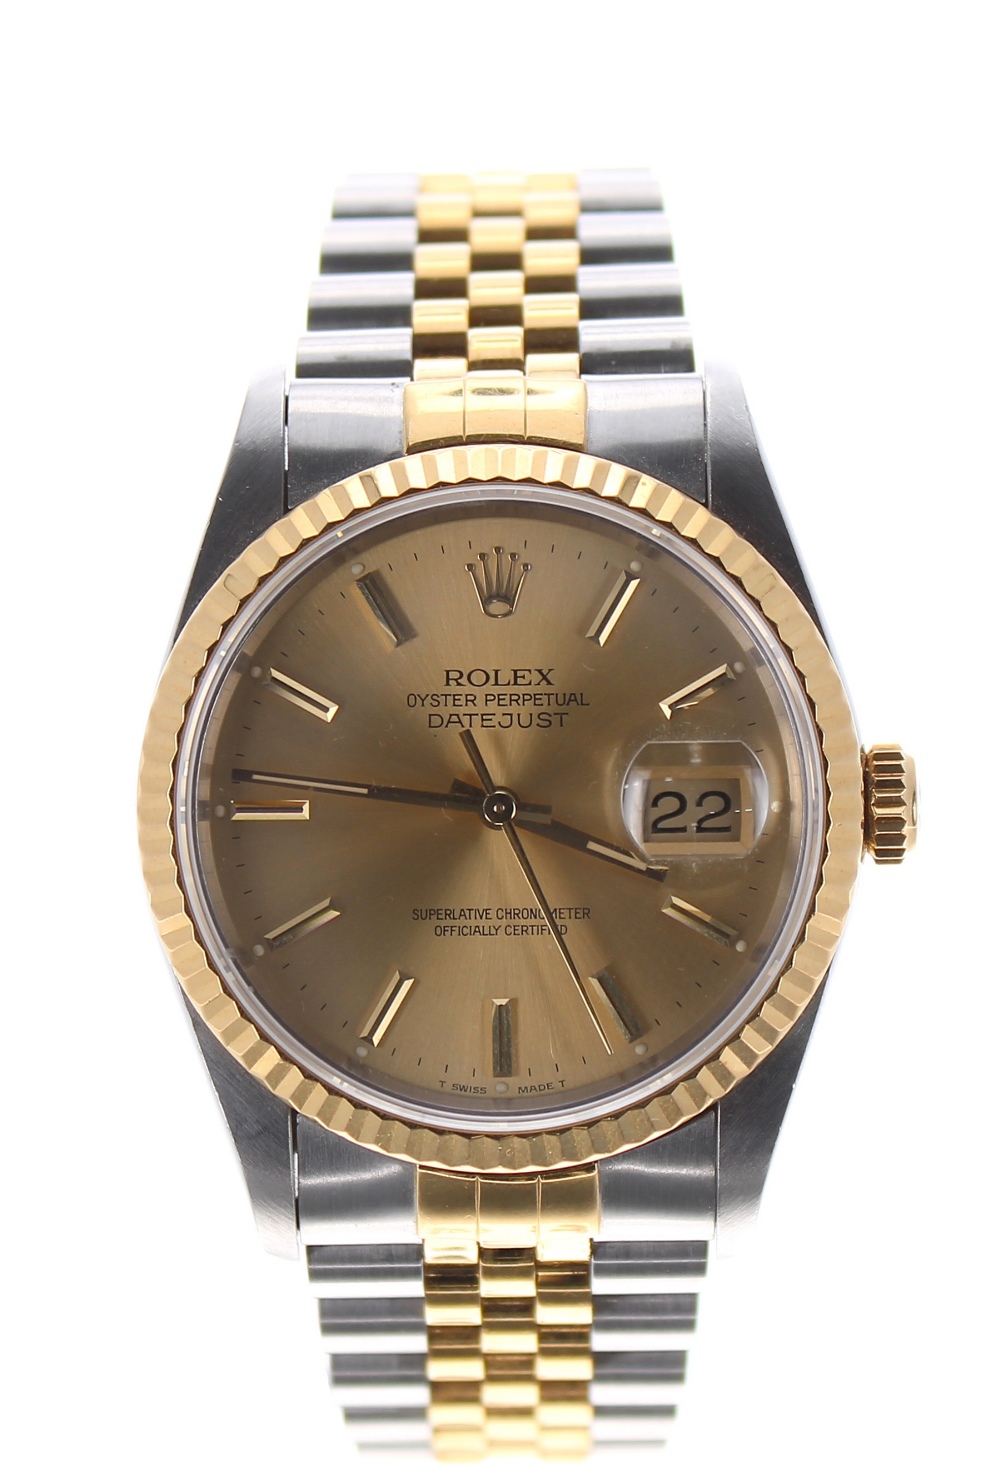 Rolex Oyster Perpetual Datejust gold and stainless steel gentleman's bracelet watch, ref. 16233, - Image 2 of 8